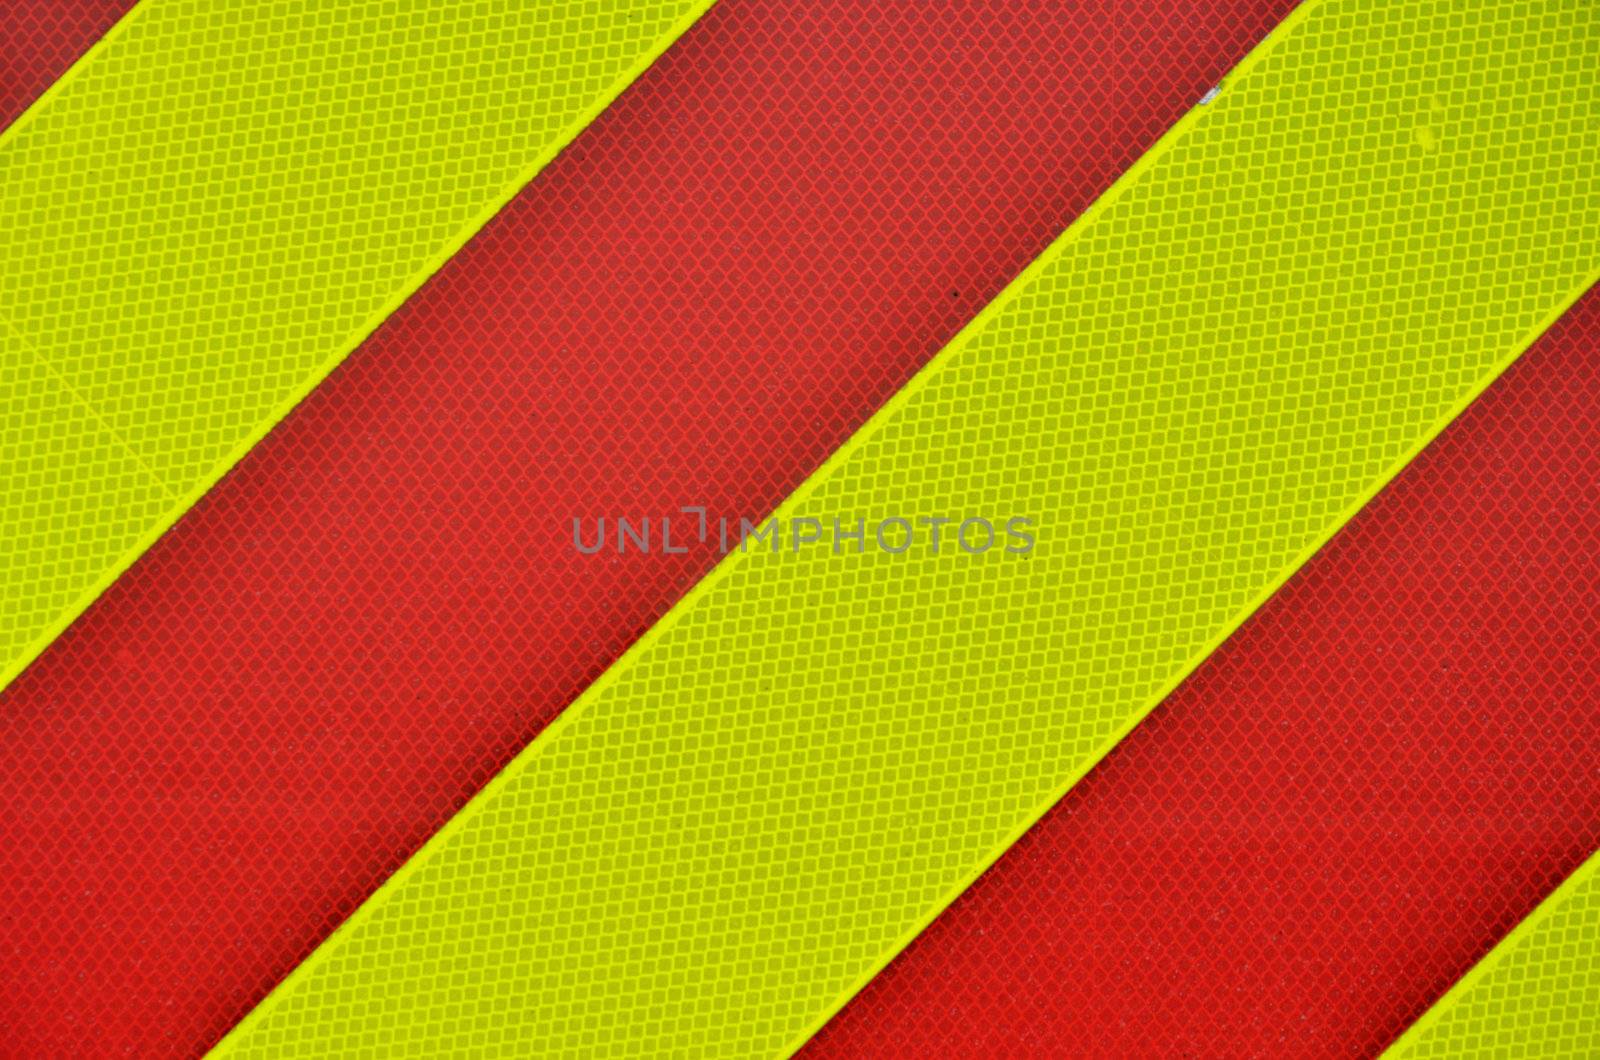 Yellow and red  High Visibility Stripes by pauws99